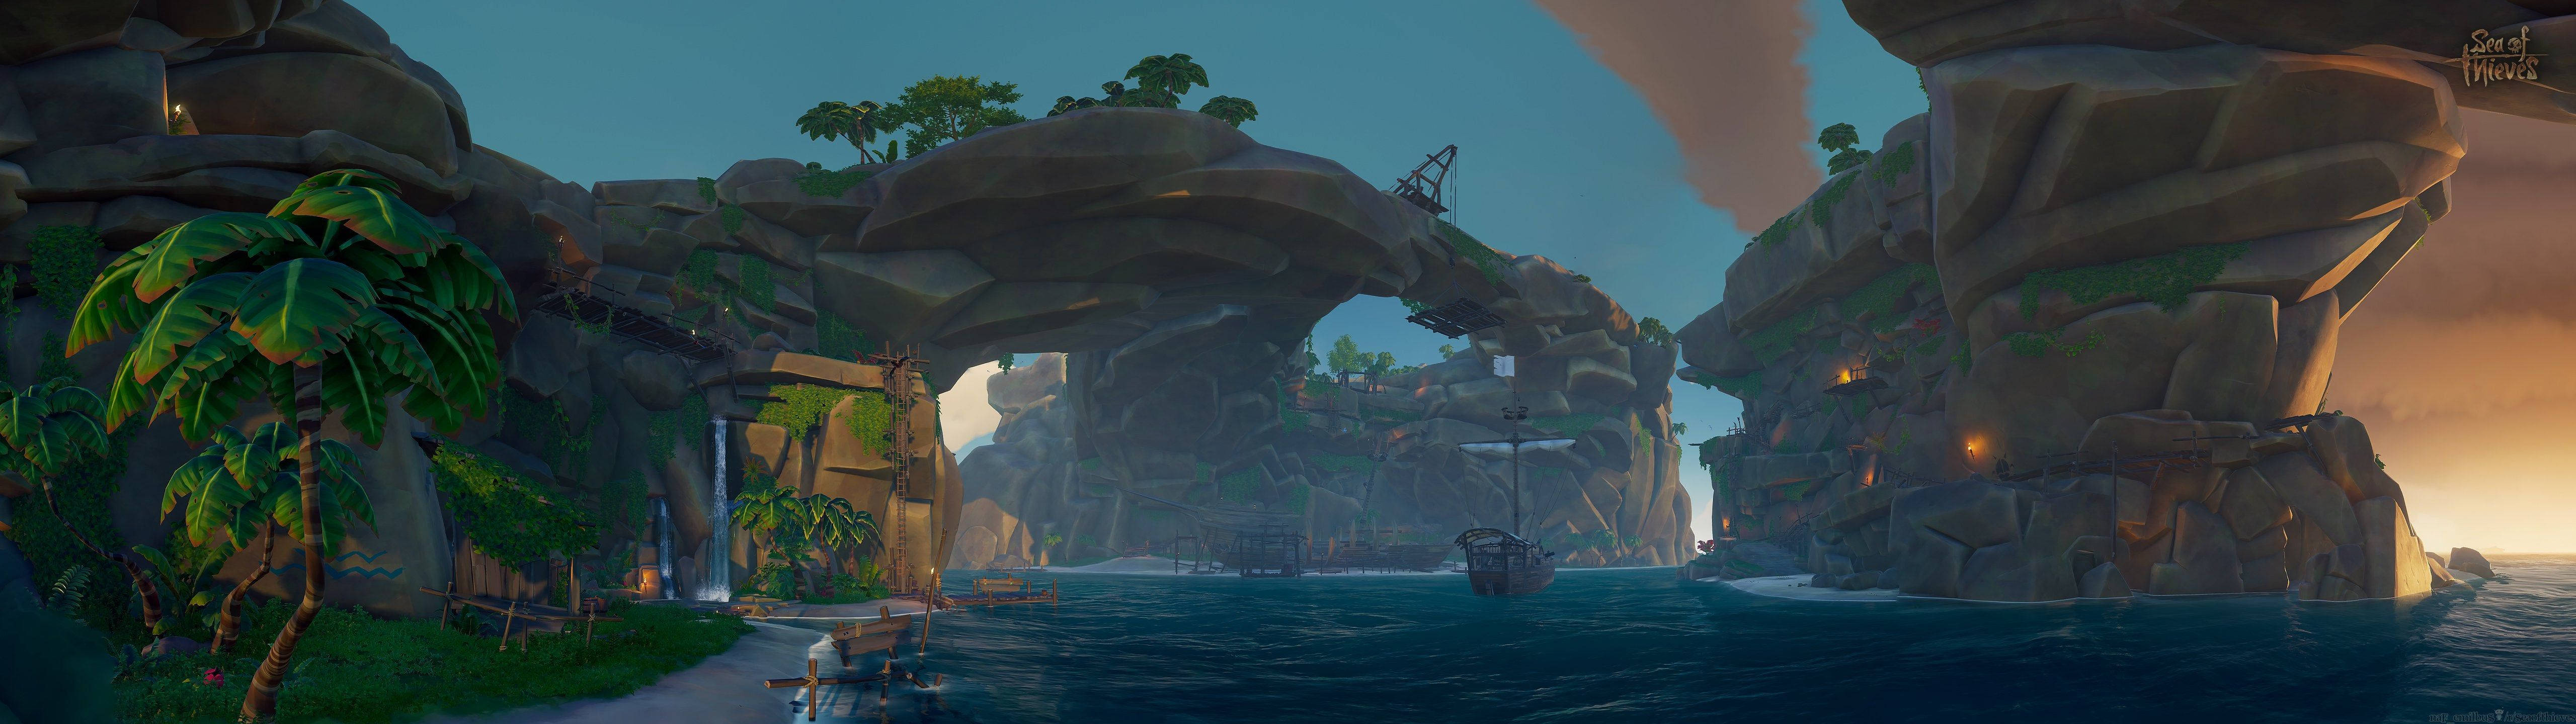 5120x1440 Game Sea Of Thieves Rock Formations Background